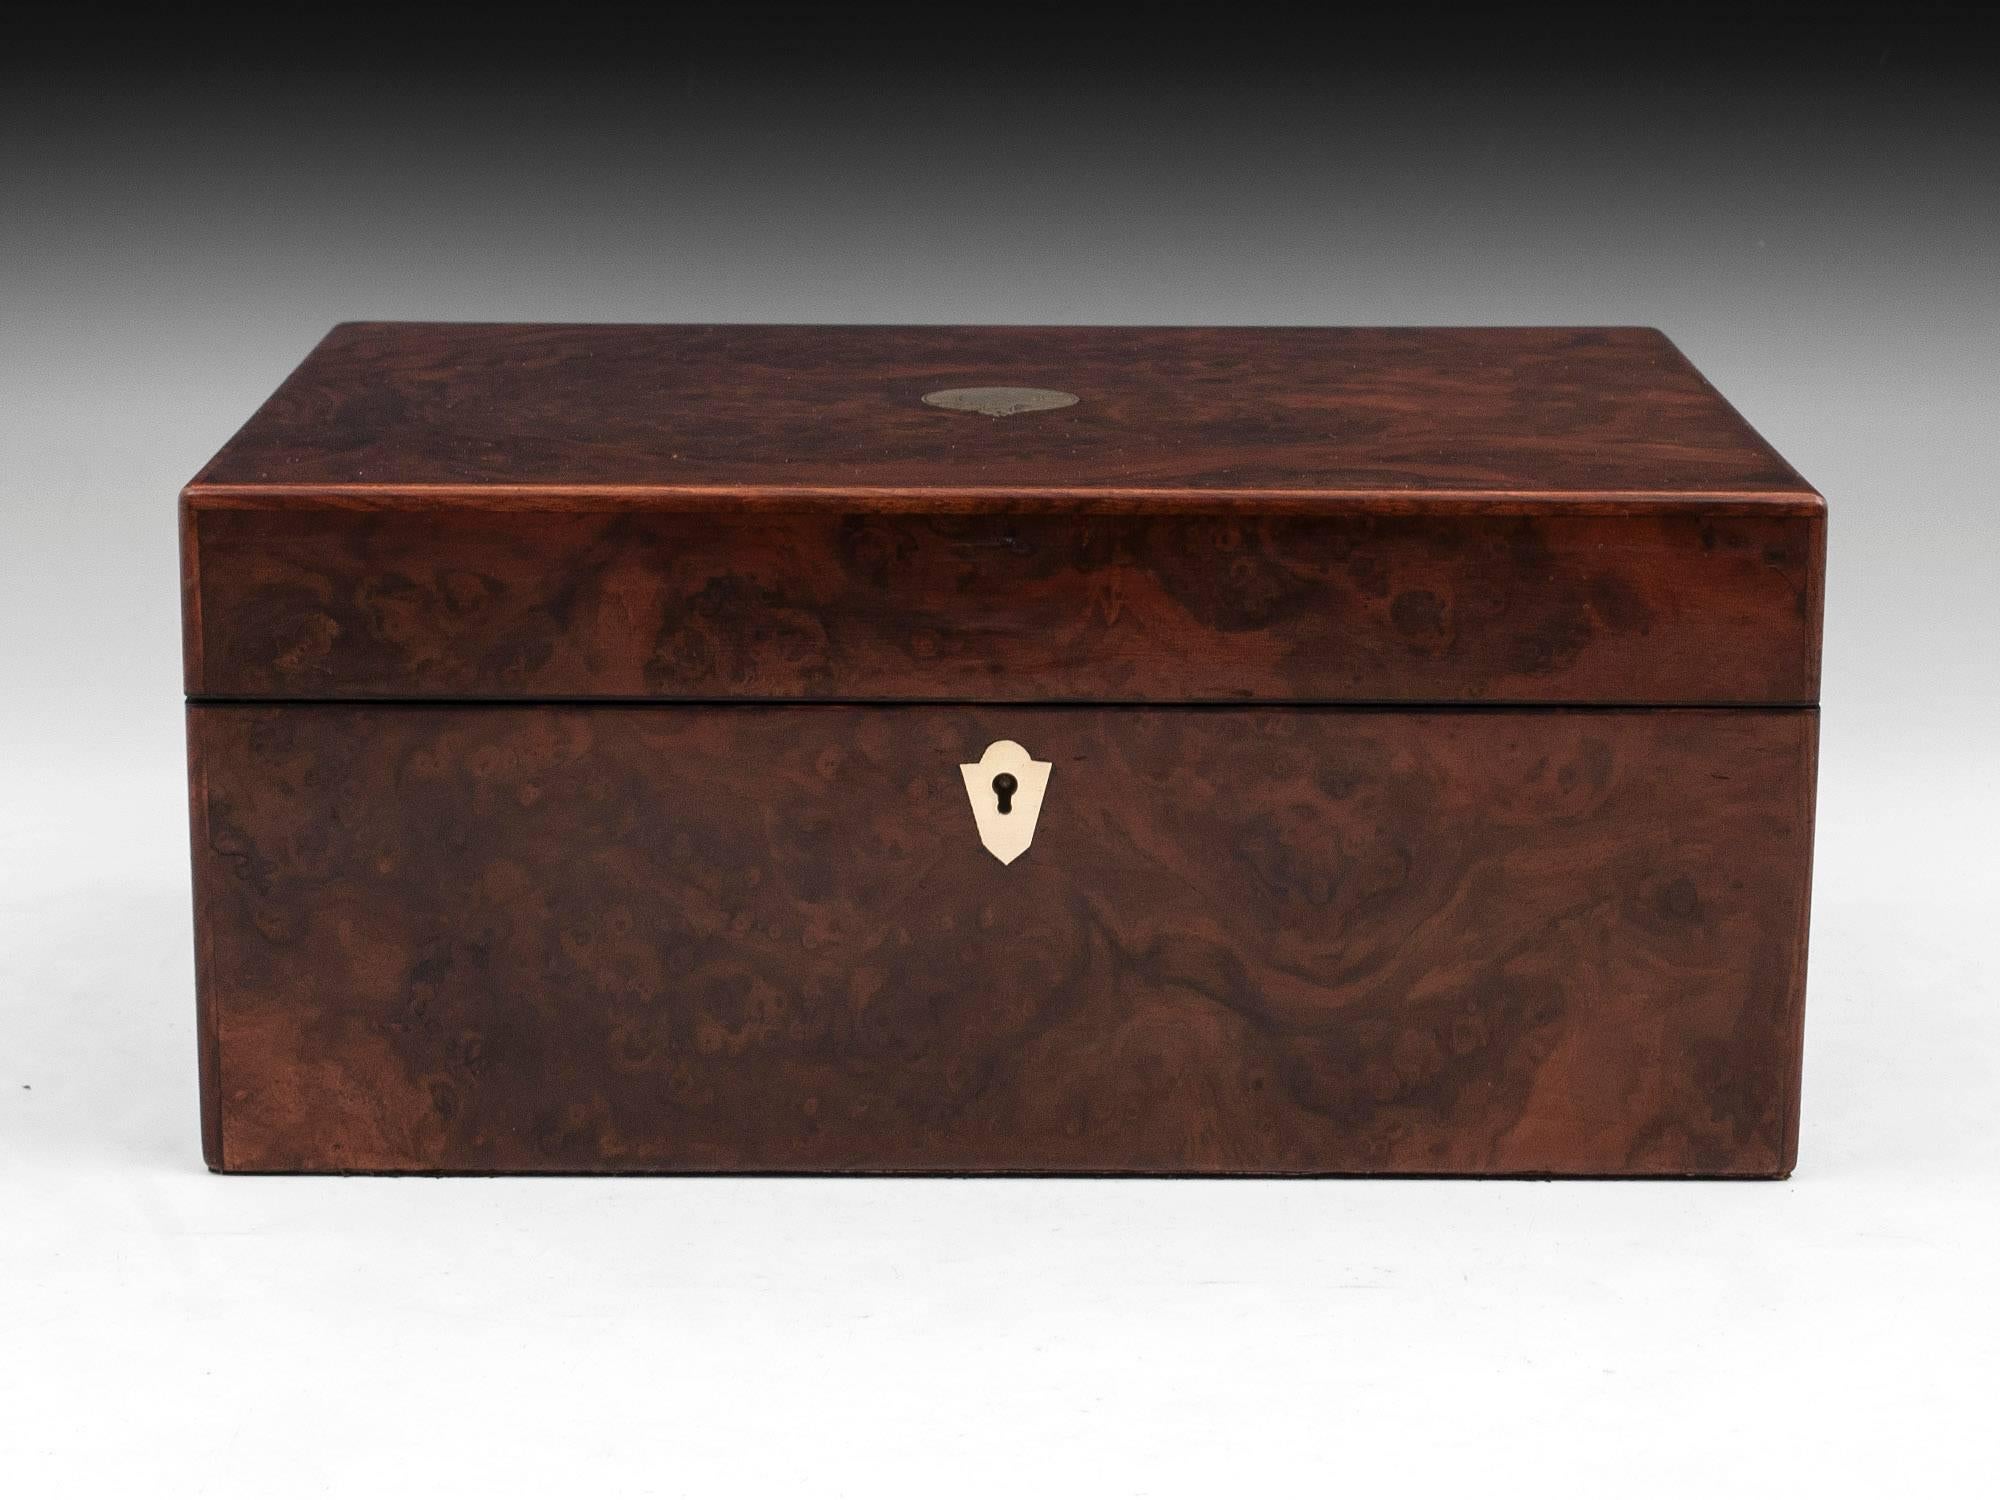 Antique burr walnut jewelry box with brass escutcheon and initial plate. 

The interior is lined with black silk and velvet. Featuring a removable tray which contains several compartments including two for rings, earrings or cufflinks. Underneath